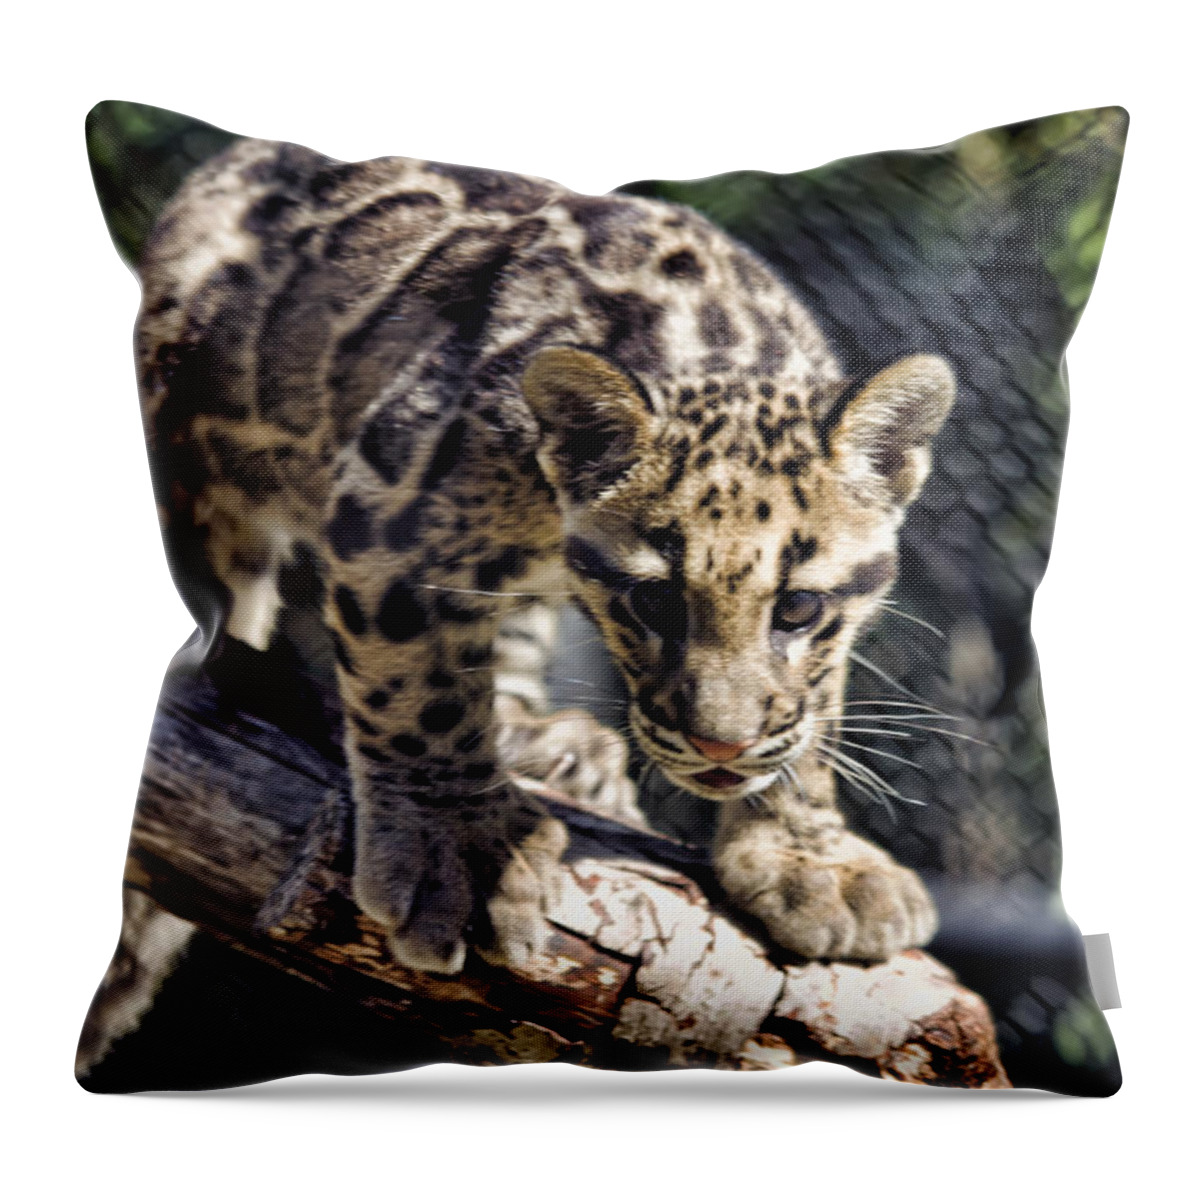 Brad Granger Throw Pillow featuring the photograph Baby Clouded Leopard by Brad Granger